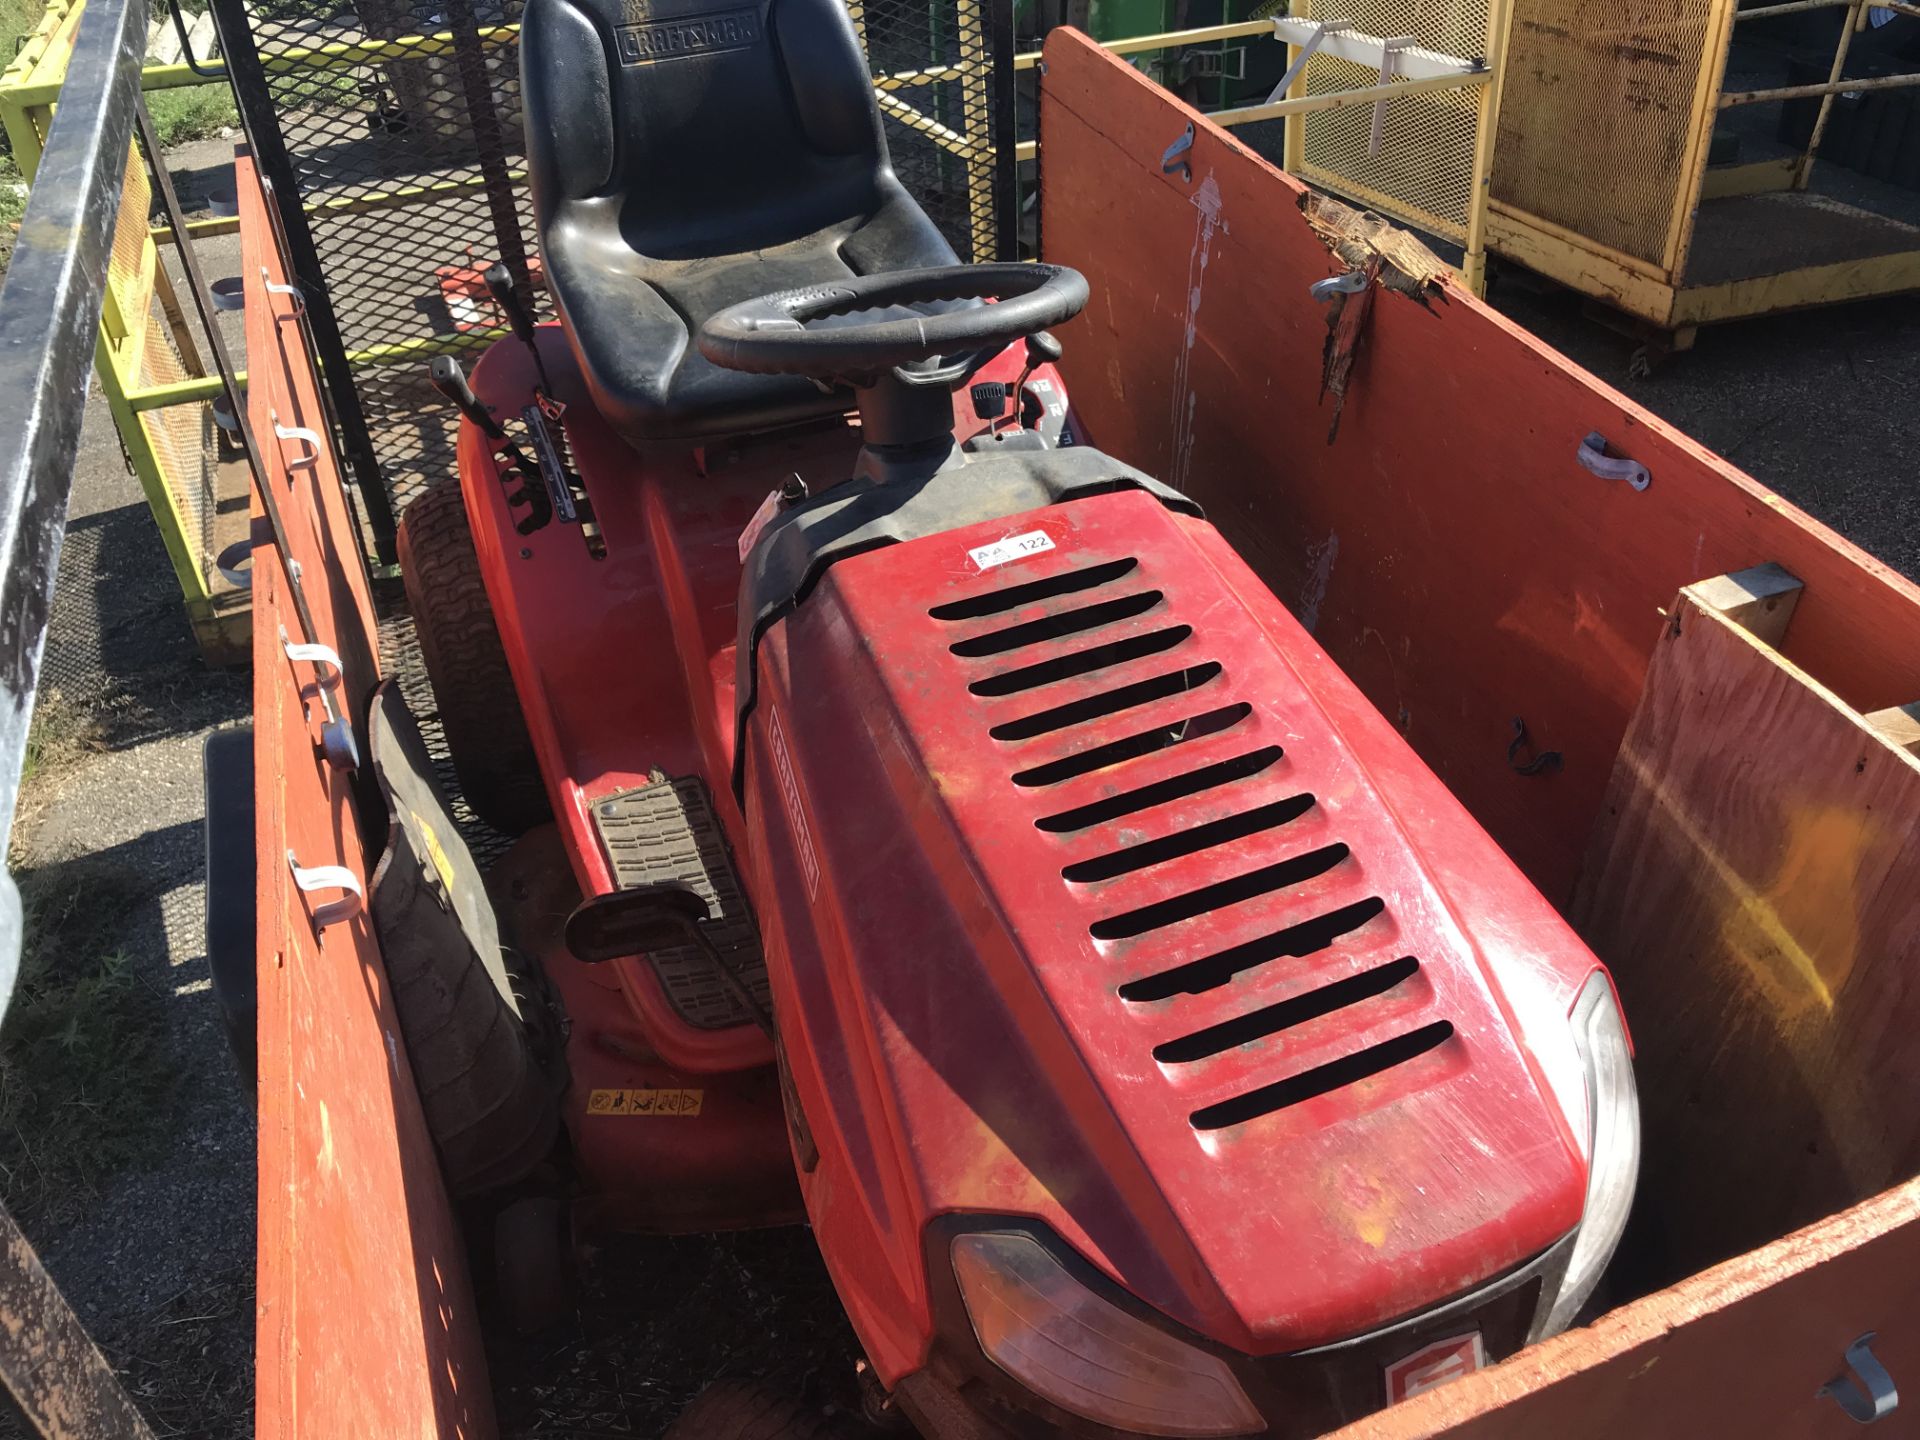 Craftsman Riding Mower with Trailer (Located at 8300 National Highway, Pennsauken, NJ) - Image 6 of 8